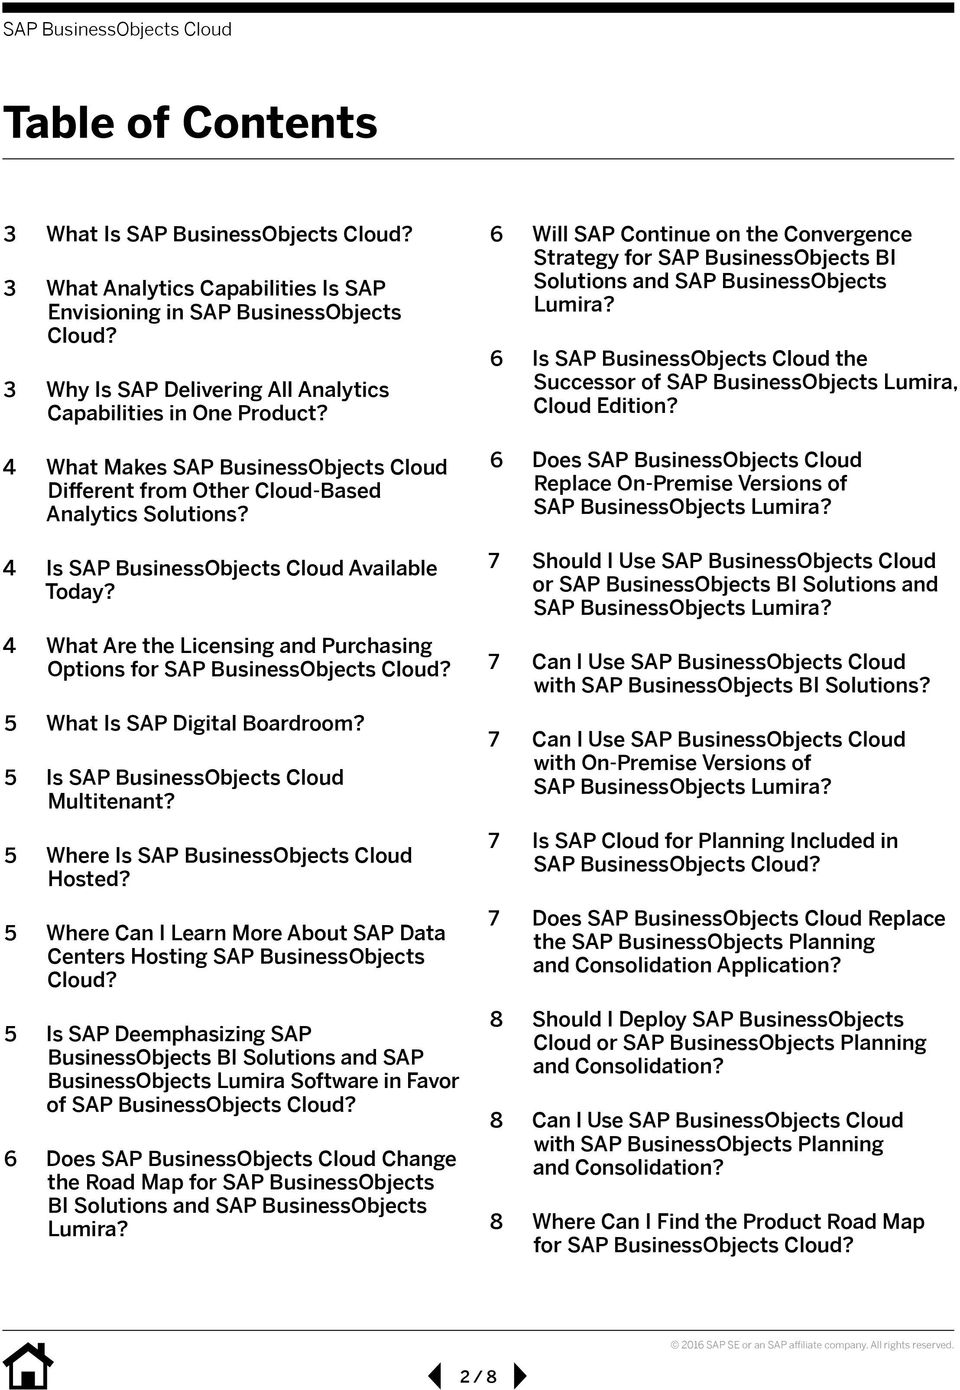 4 What Are the Licensing and Purchasing Options for SAP BusinessObjects Cloud? 5 What Is SAP Digital Boardroom? 5 Is SAP BusinessObjects Cloud Multitenant? 5 Where Is SAP BusinessObjects Cloud Hosted?